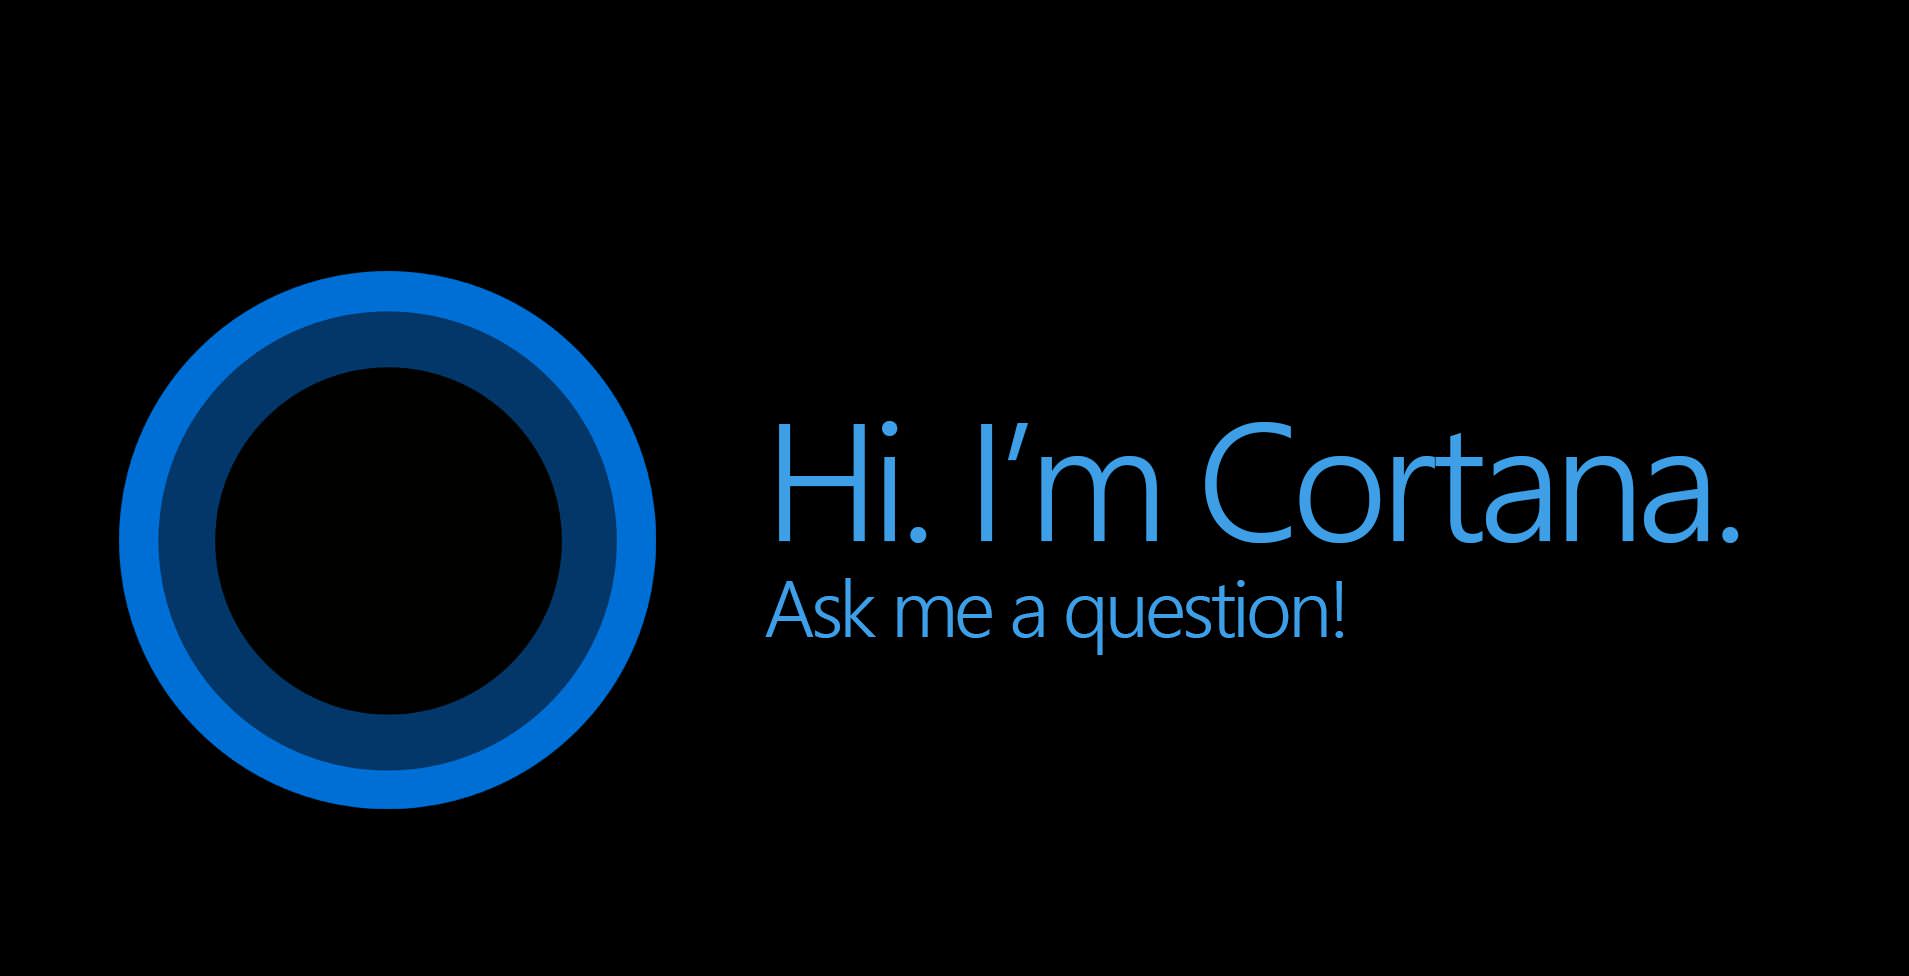 Cortana comes to Xbox One but Microsoft Needs a Bigger Trojan Horse for the Home